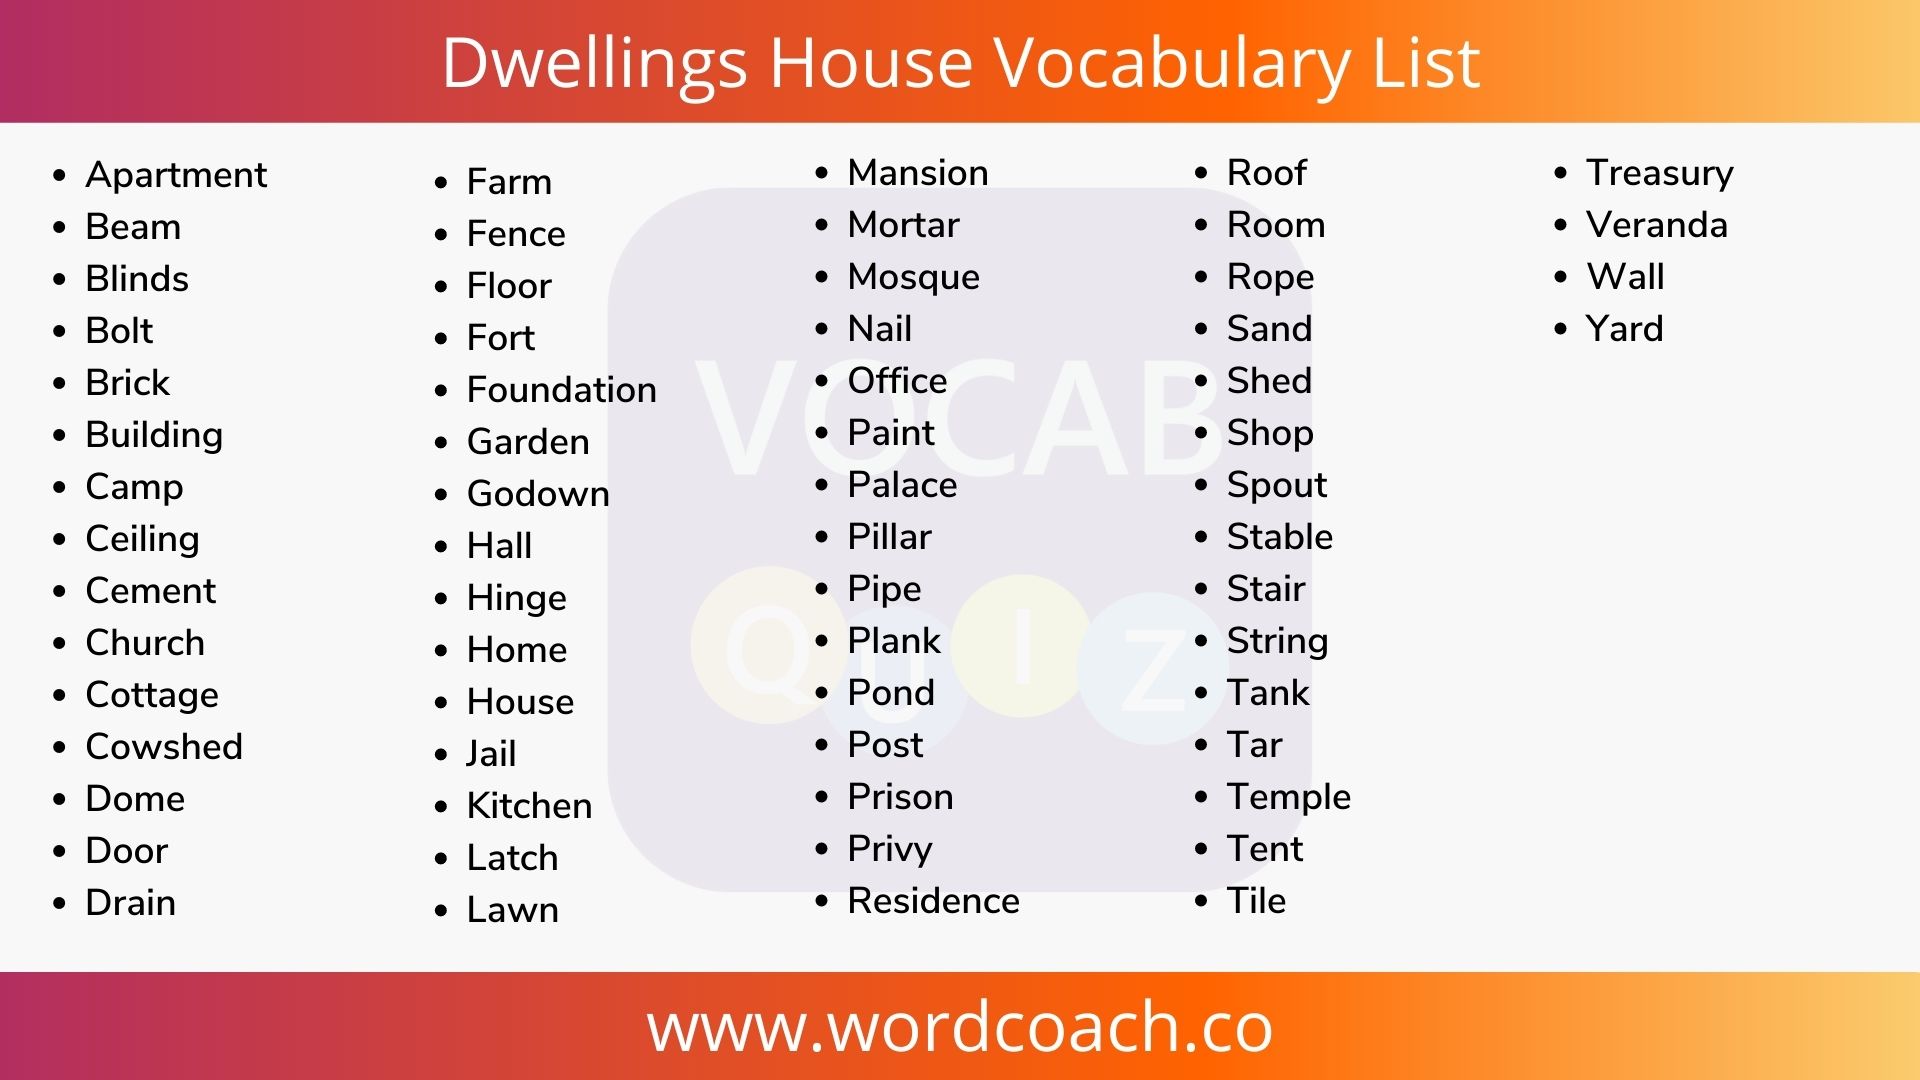 Dwellings House Vocabulary List - wordcoach.co